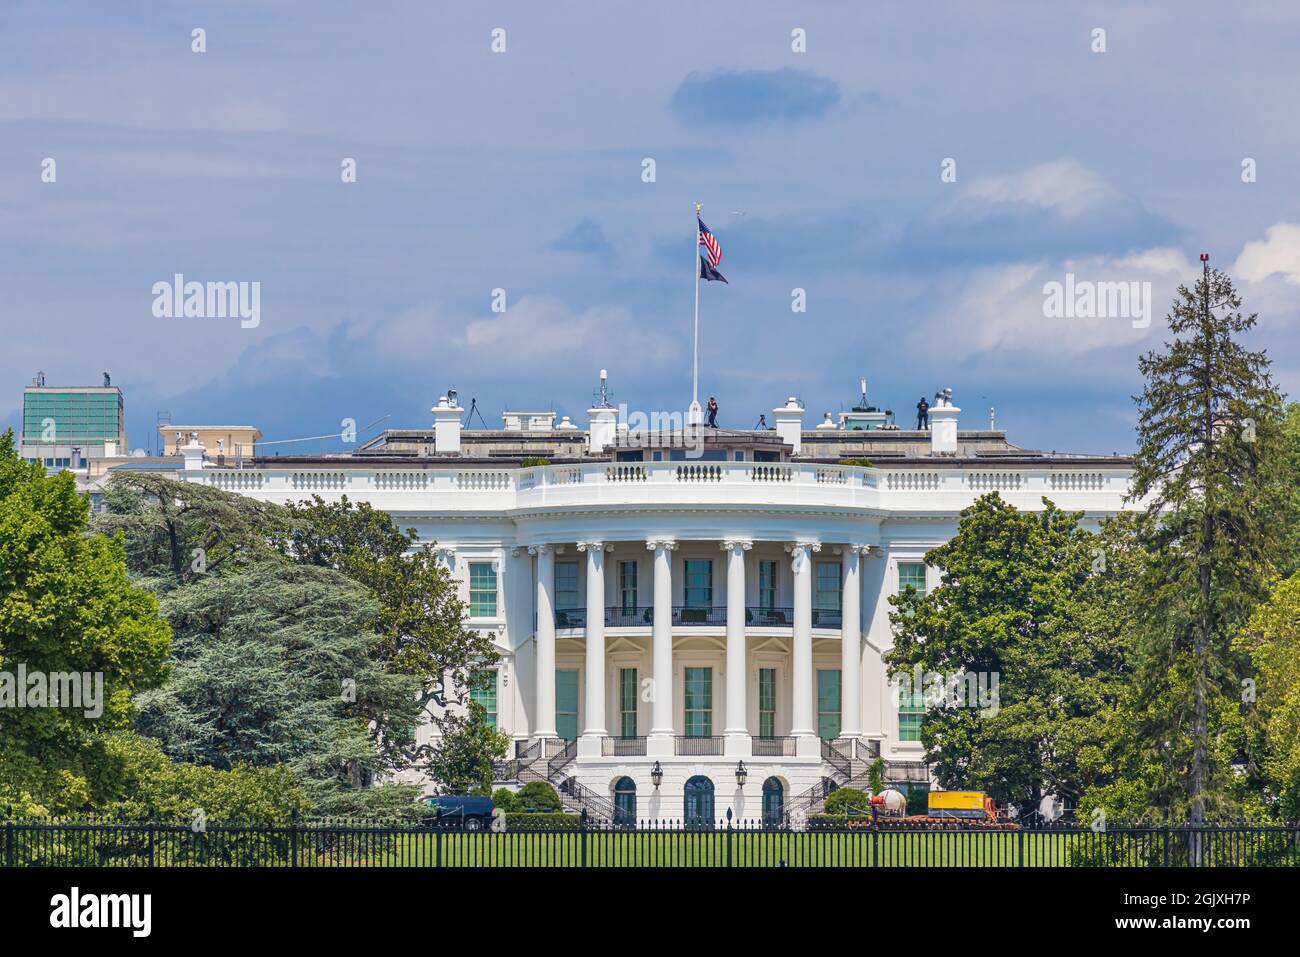 WASHINGTON DC - AUGUST, 15, 2021: The White House seen from the south side lawn, Washington DC, USA Stock Photo